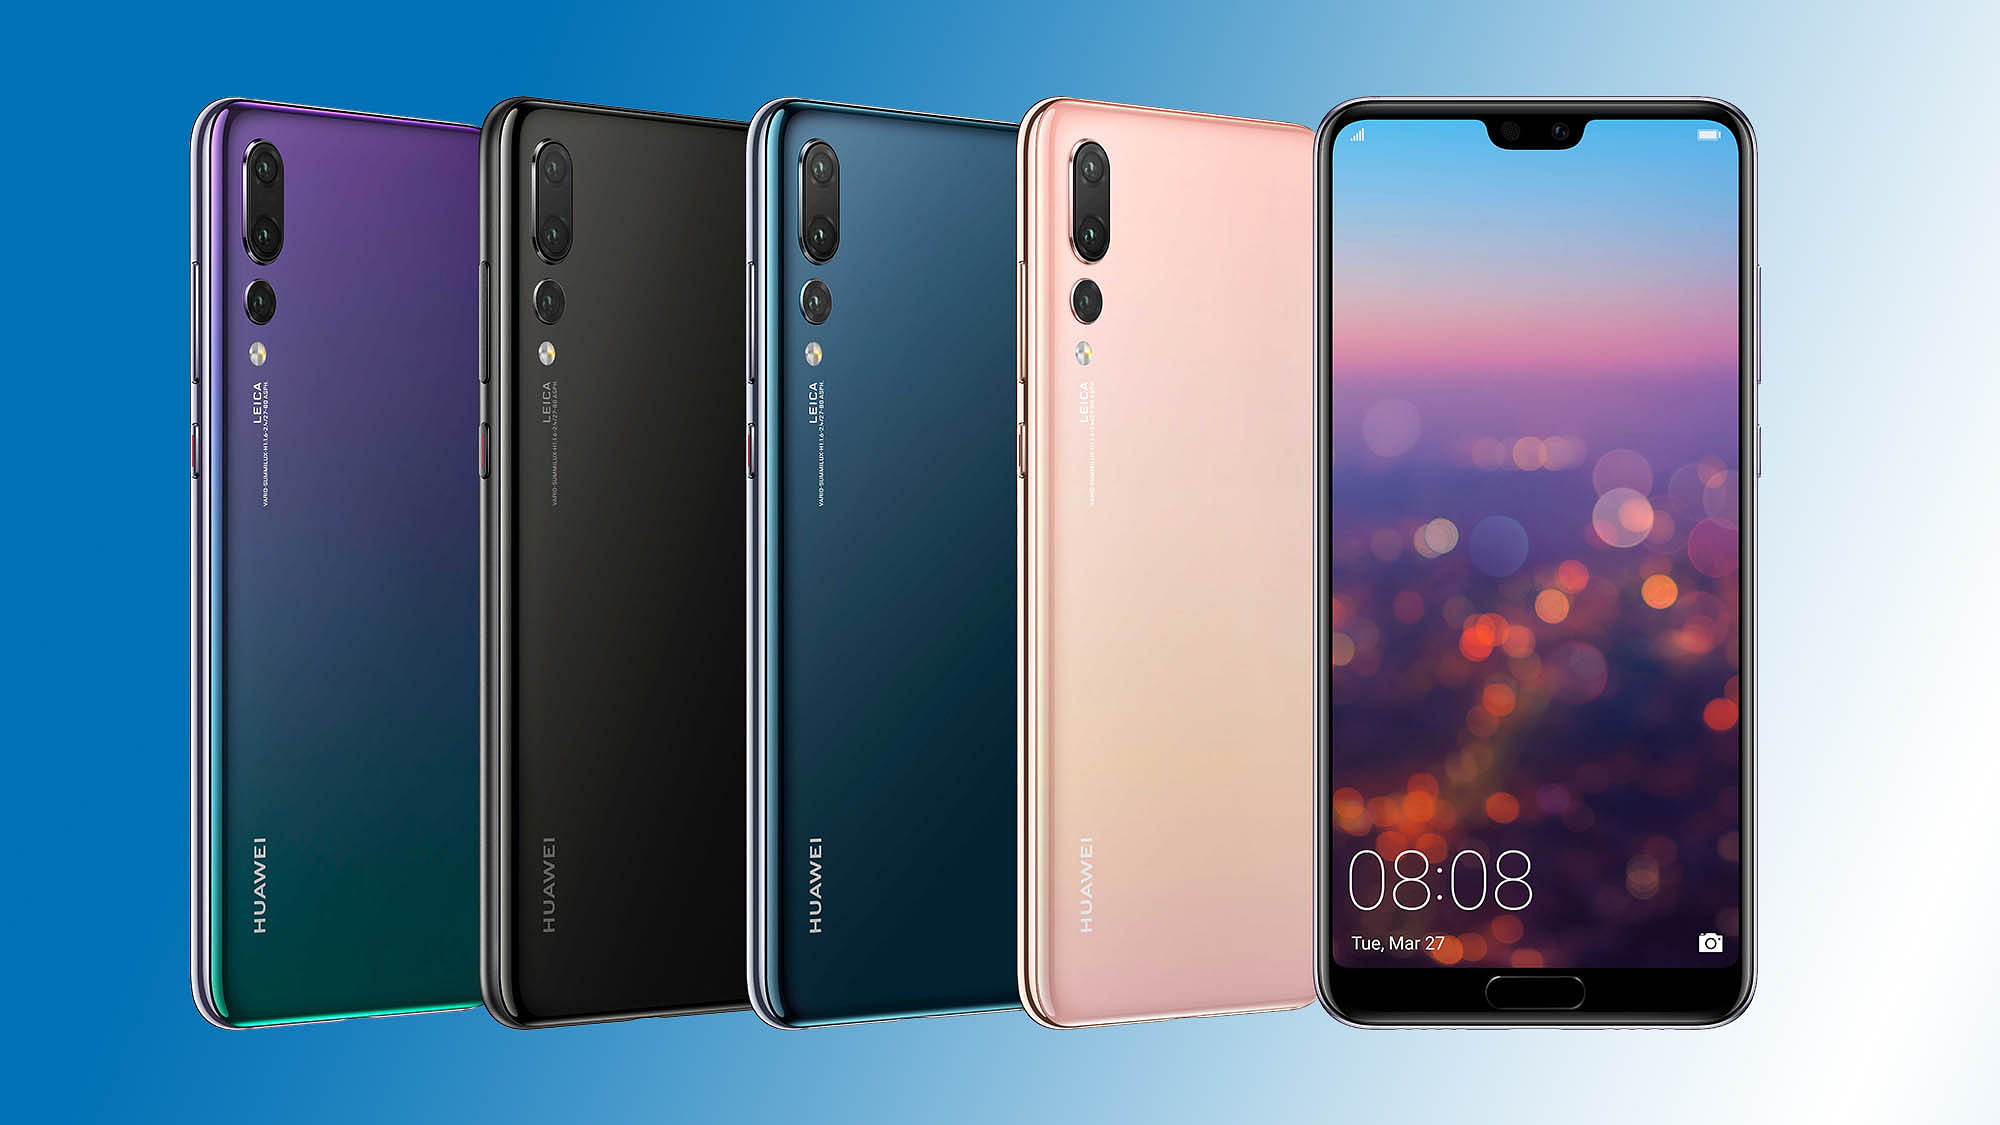 Huawei P20 Pro is feature-loaded and has a steep price tag.&nbsp;